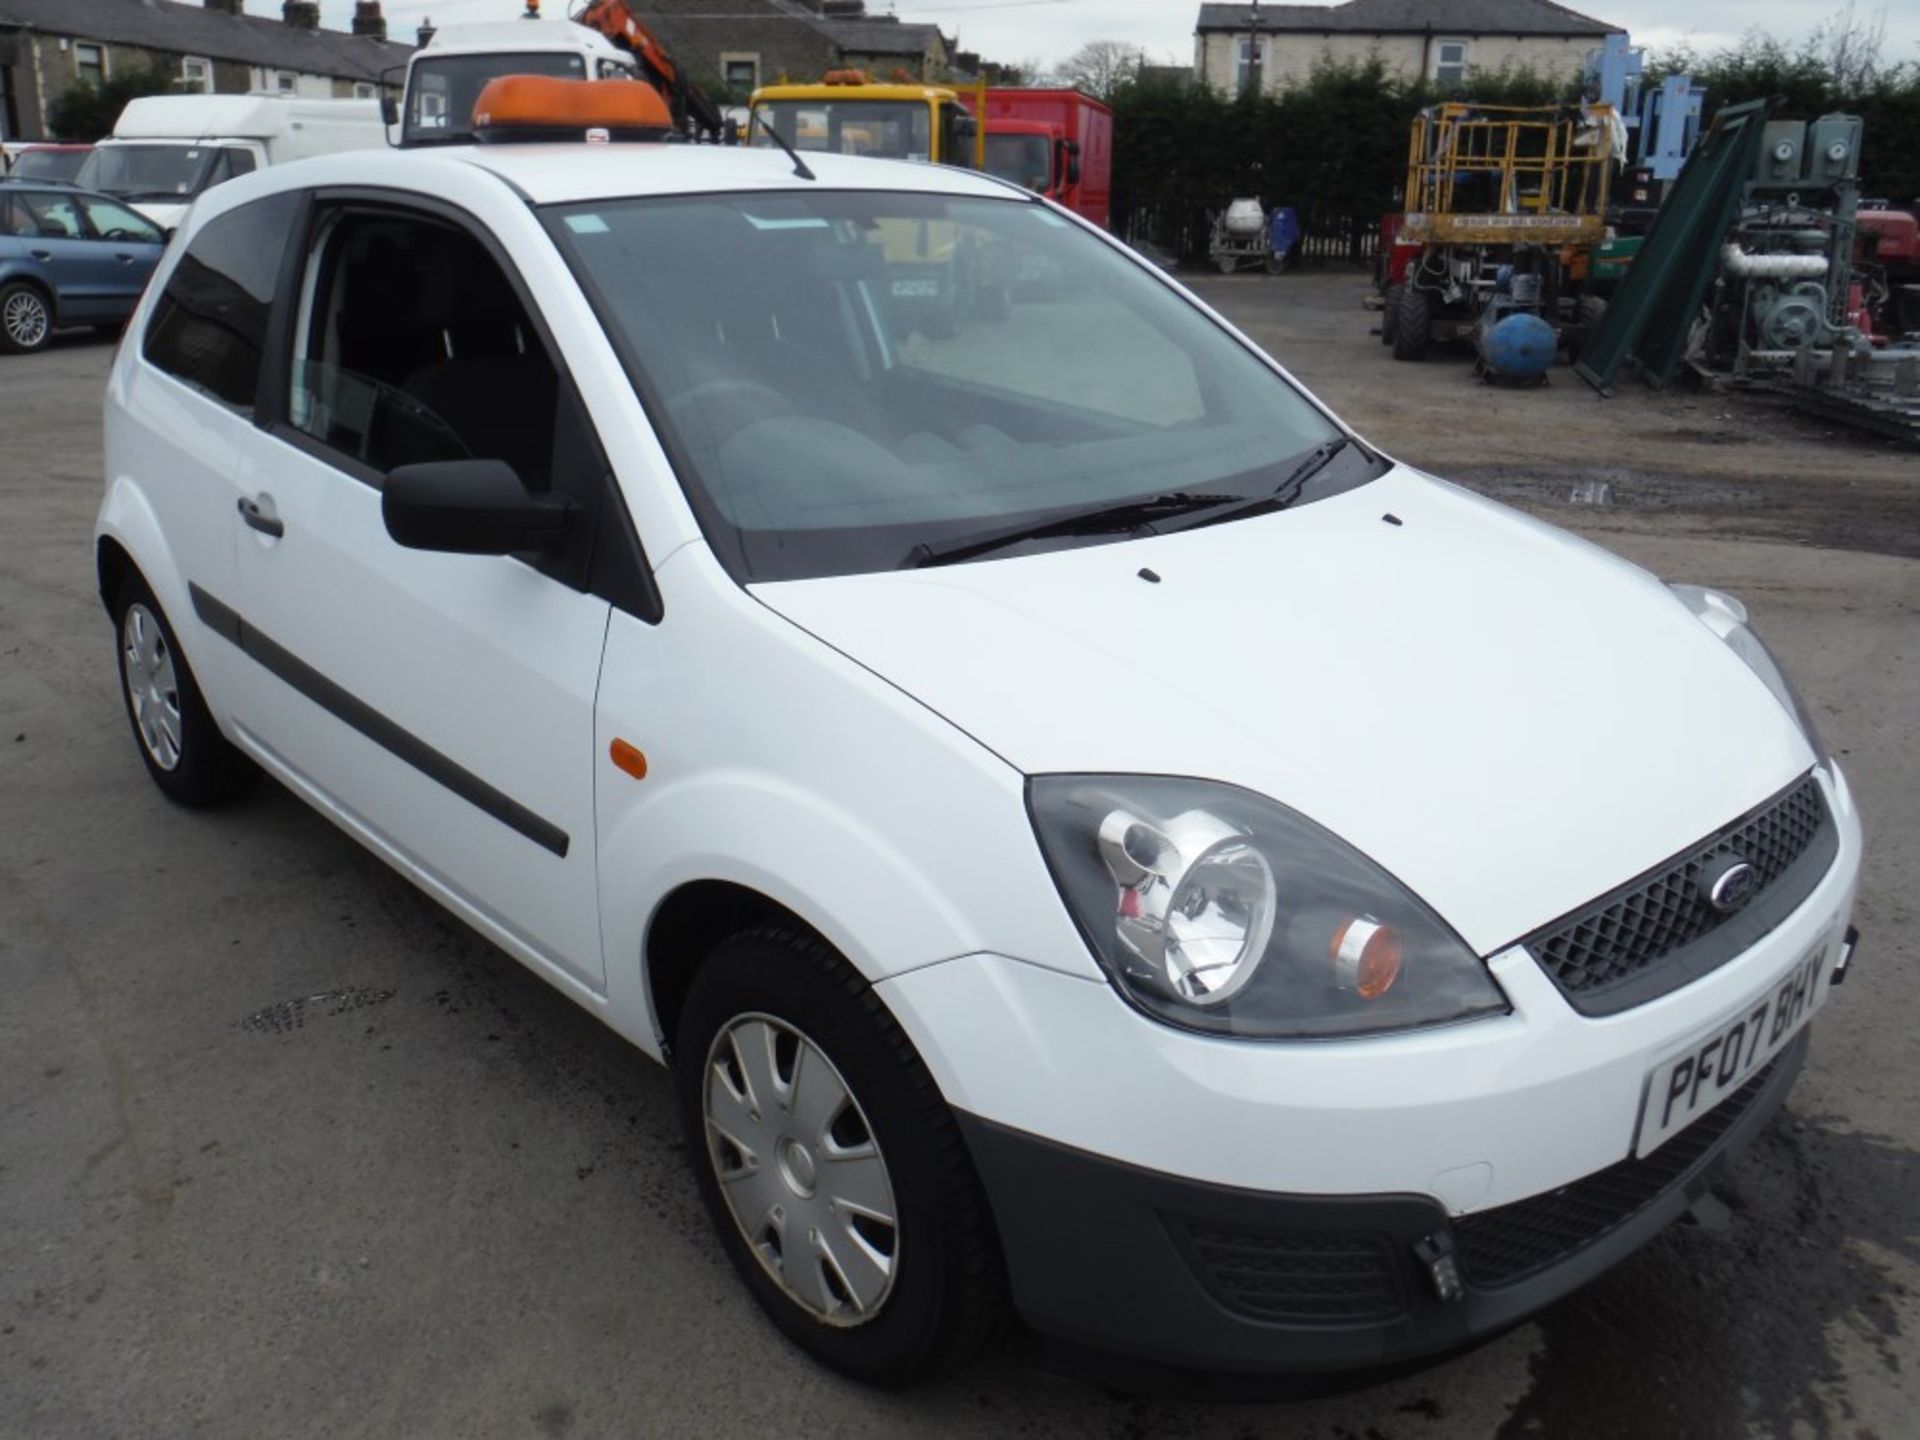 07 reg FORD FIESTA TDCI VAN, 1ST REG 05/07, 161824M, V5 HERE, 1OWNER FROM NEW (DIRECT COUNCIL) [+